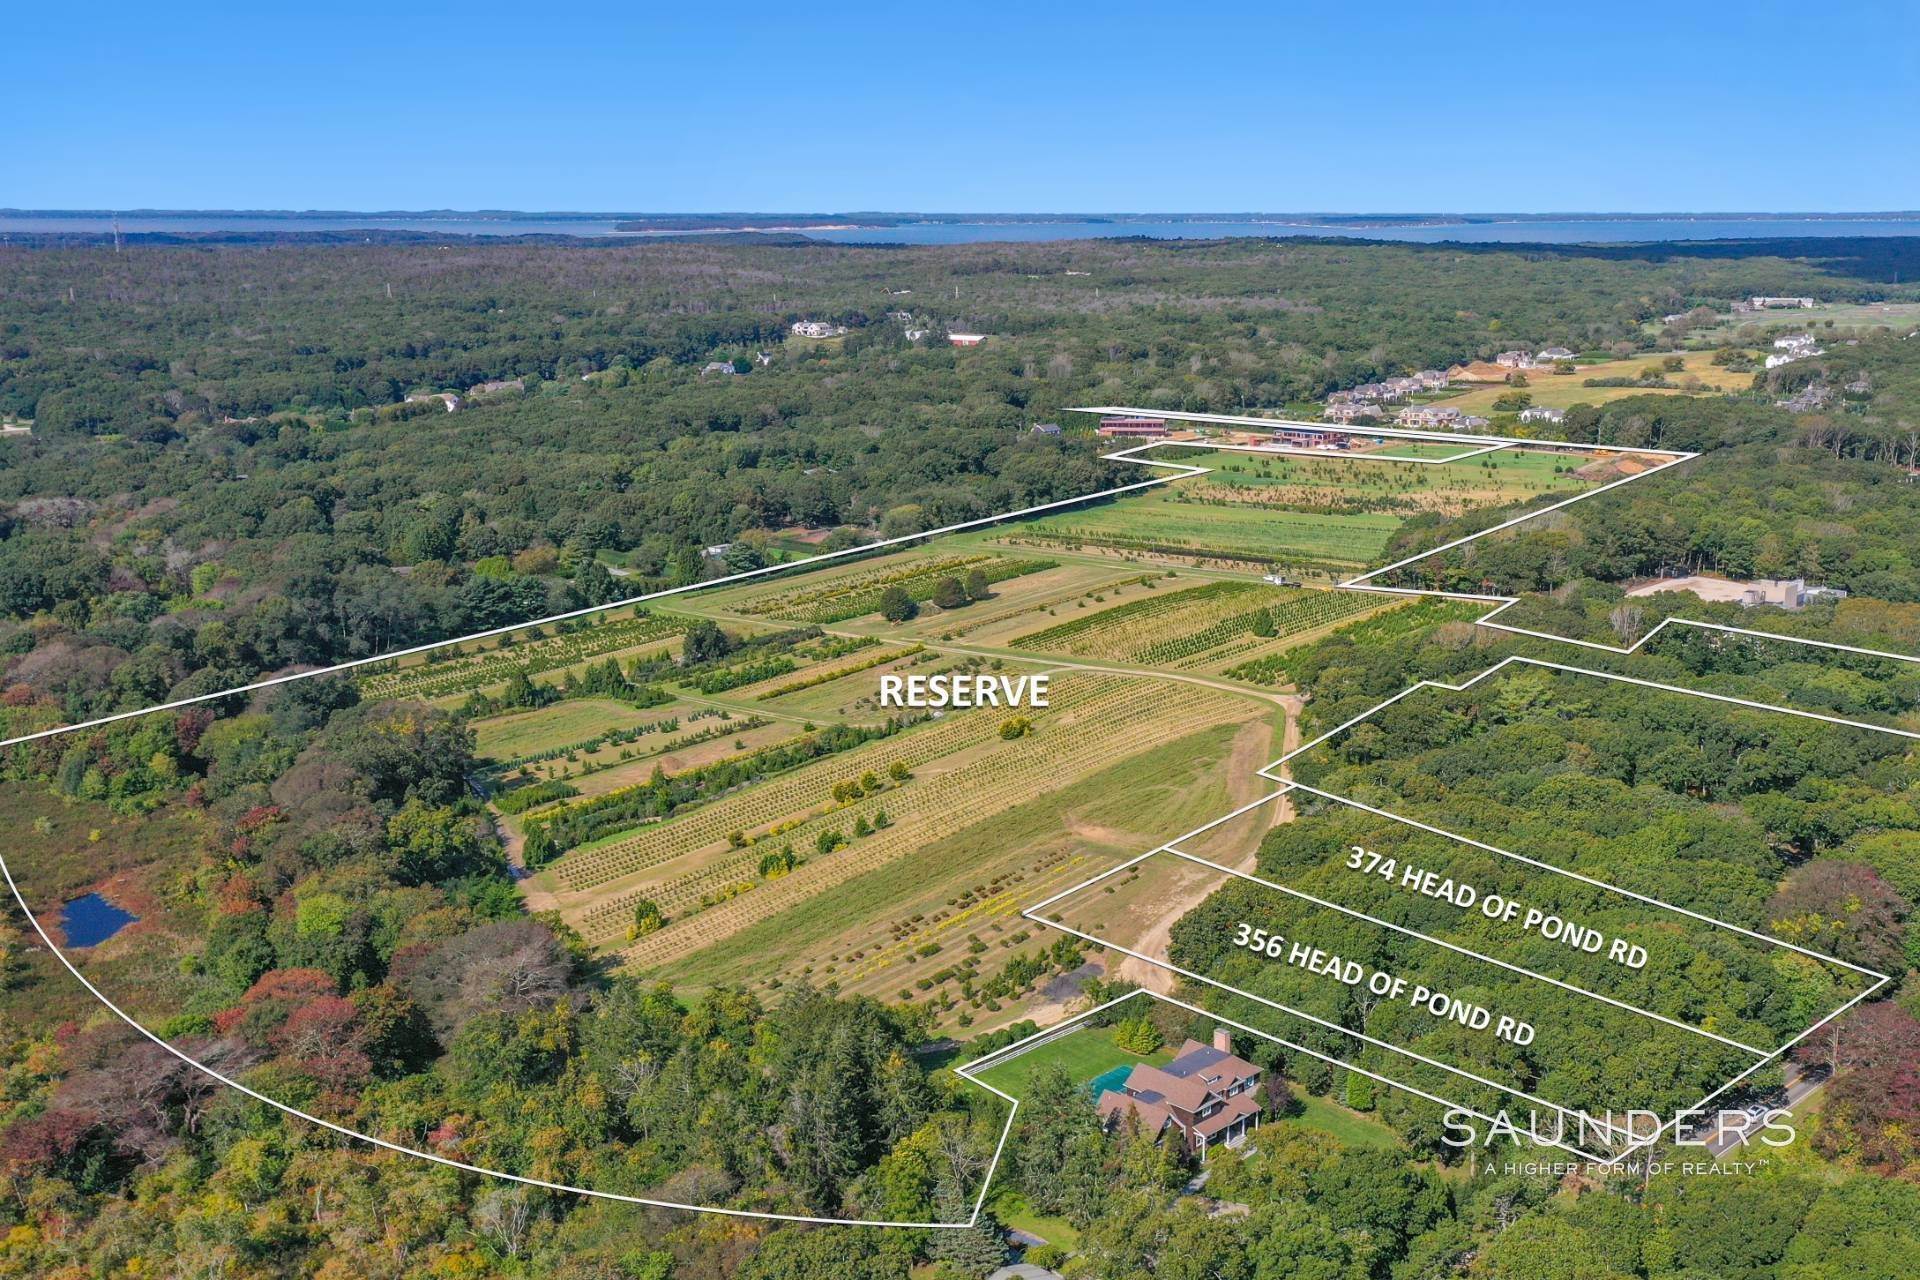 2. Land for Sale at 50-Acre Country Estate Opportunity In Water Mill 350 Head Of Pond Road, Water Mill, NY 11976